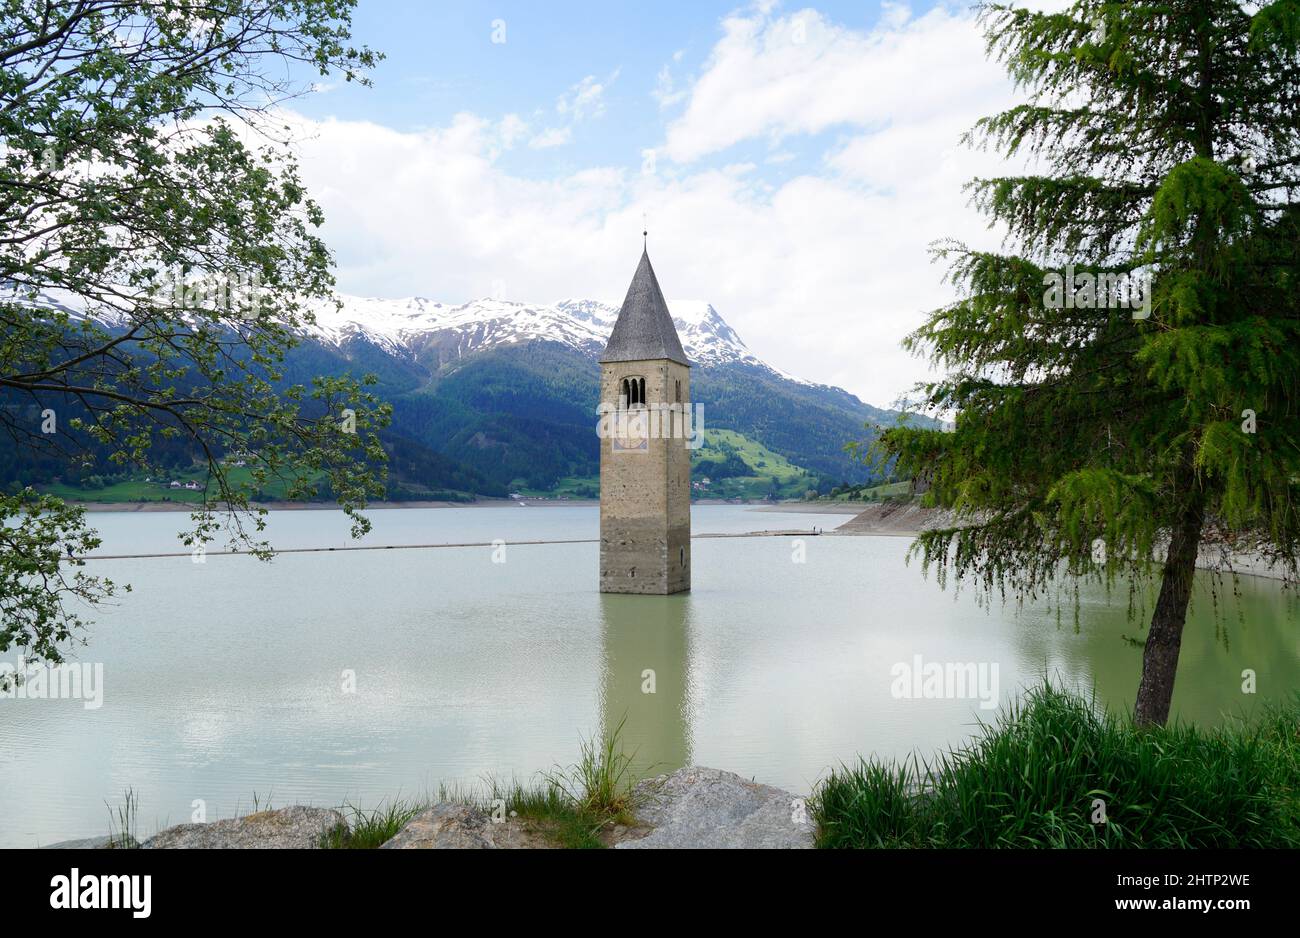 a picturesque view of lake Resia and the sunken church steeple of Lago di Resia in the Curon region (Vinschgau, South Tyrol, Italy) Stock Photo